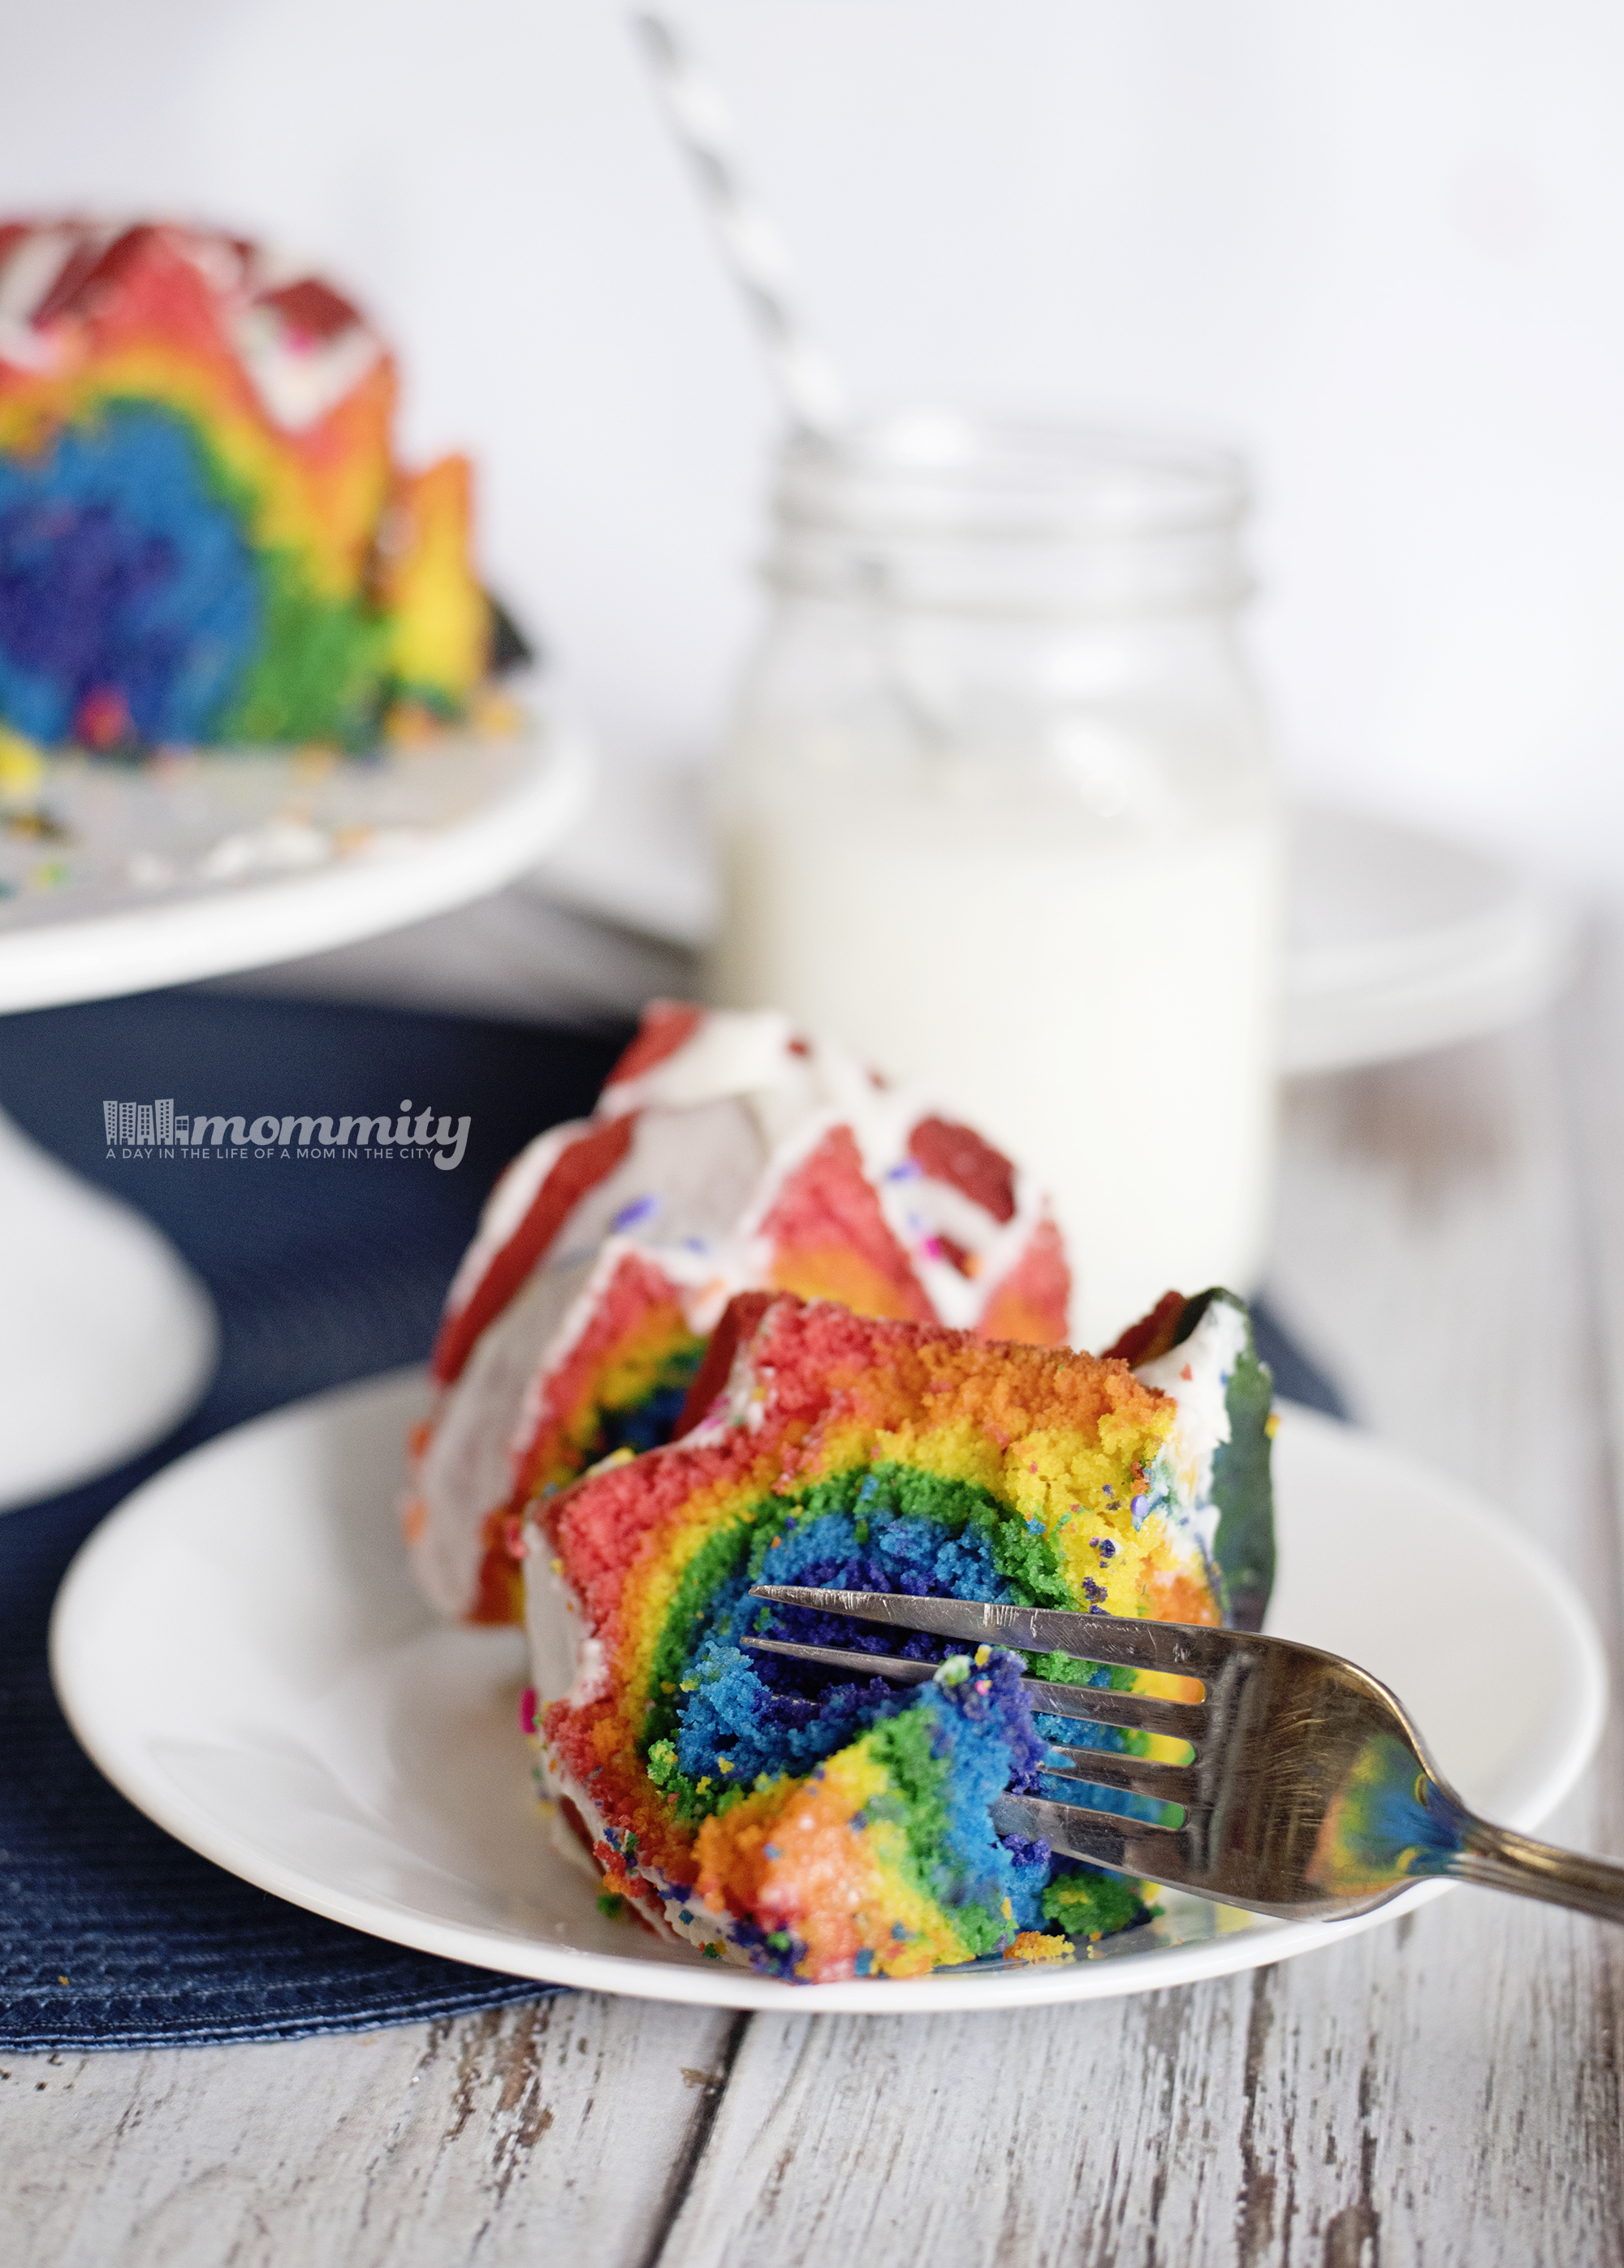 How to Make A Rainbow Cake Recipe from Scratch